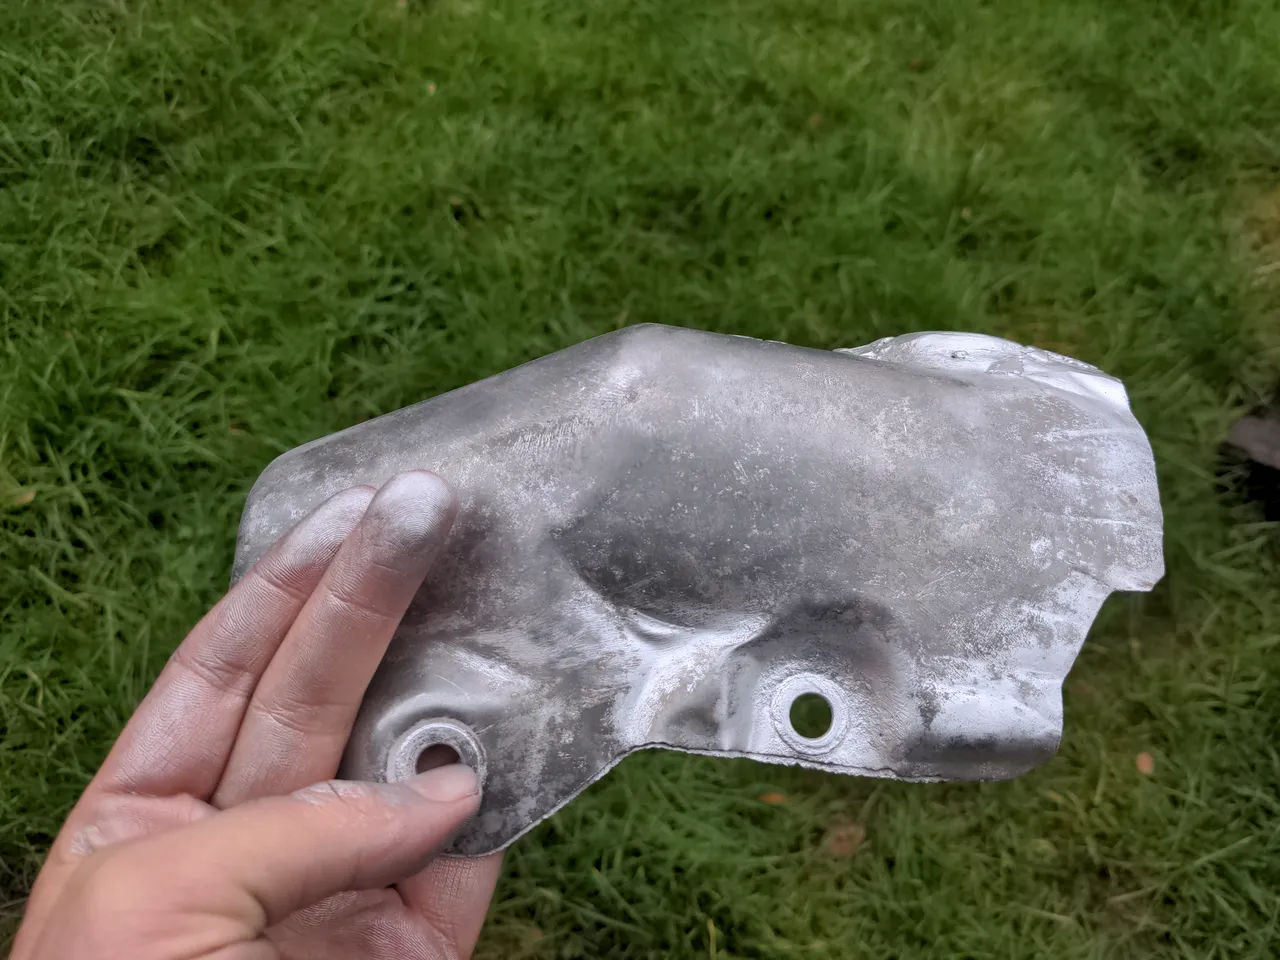 The heat shield in my hands. Two fingers are visible, coated in silver. The paint has almost entirely come off the heat shield.